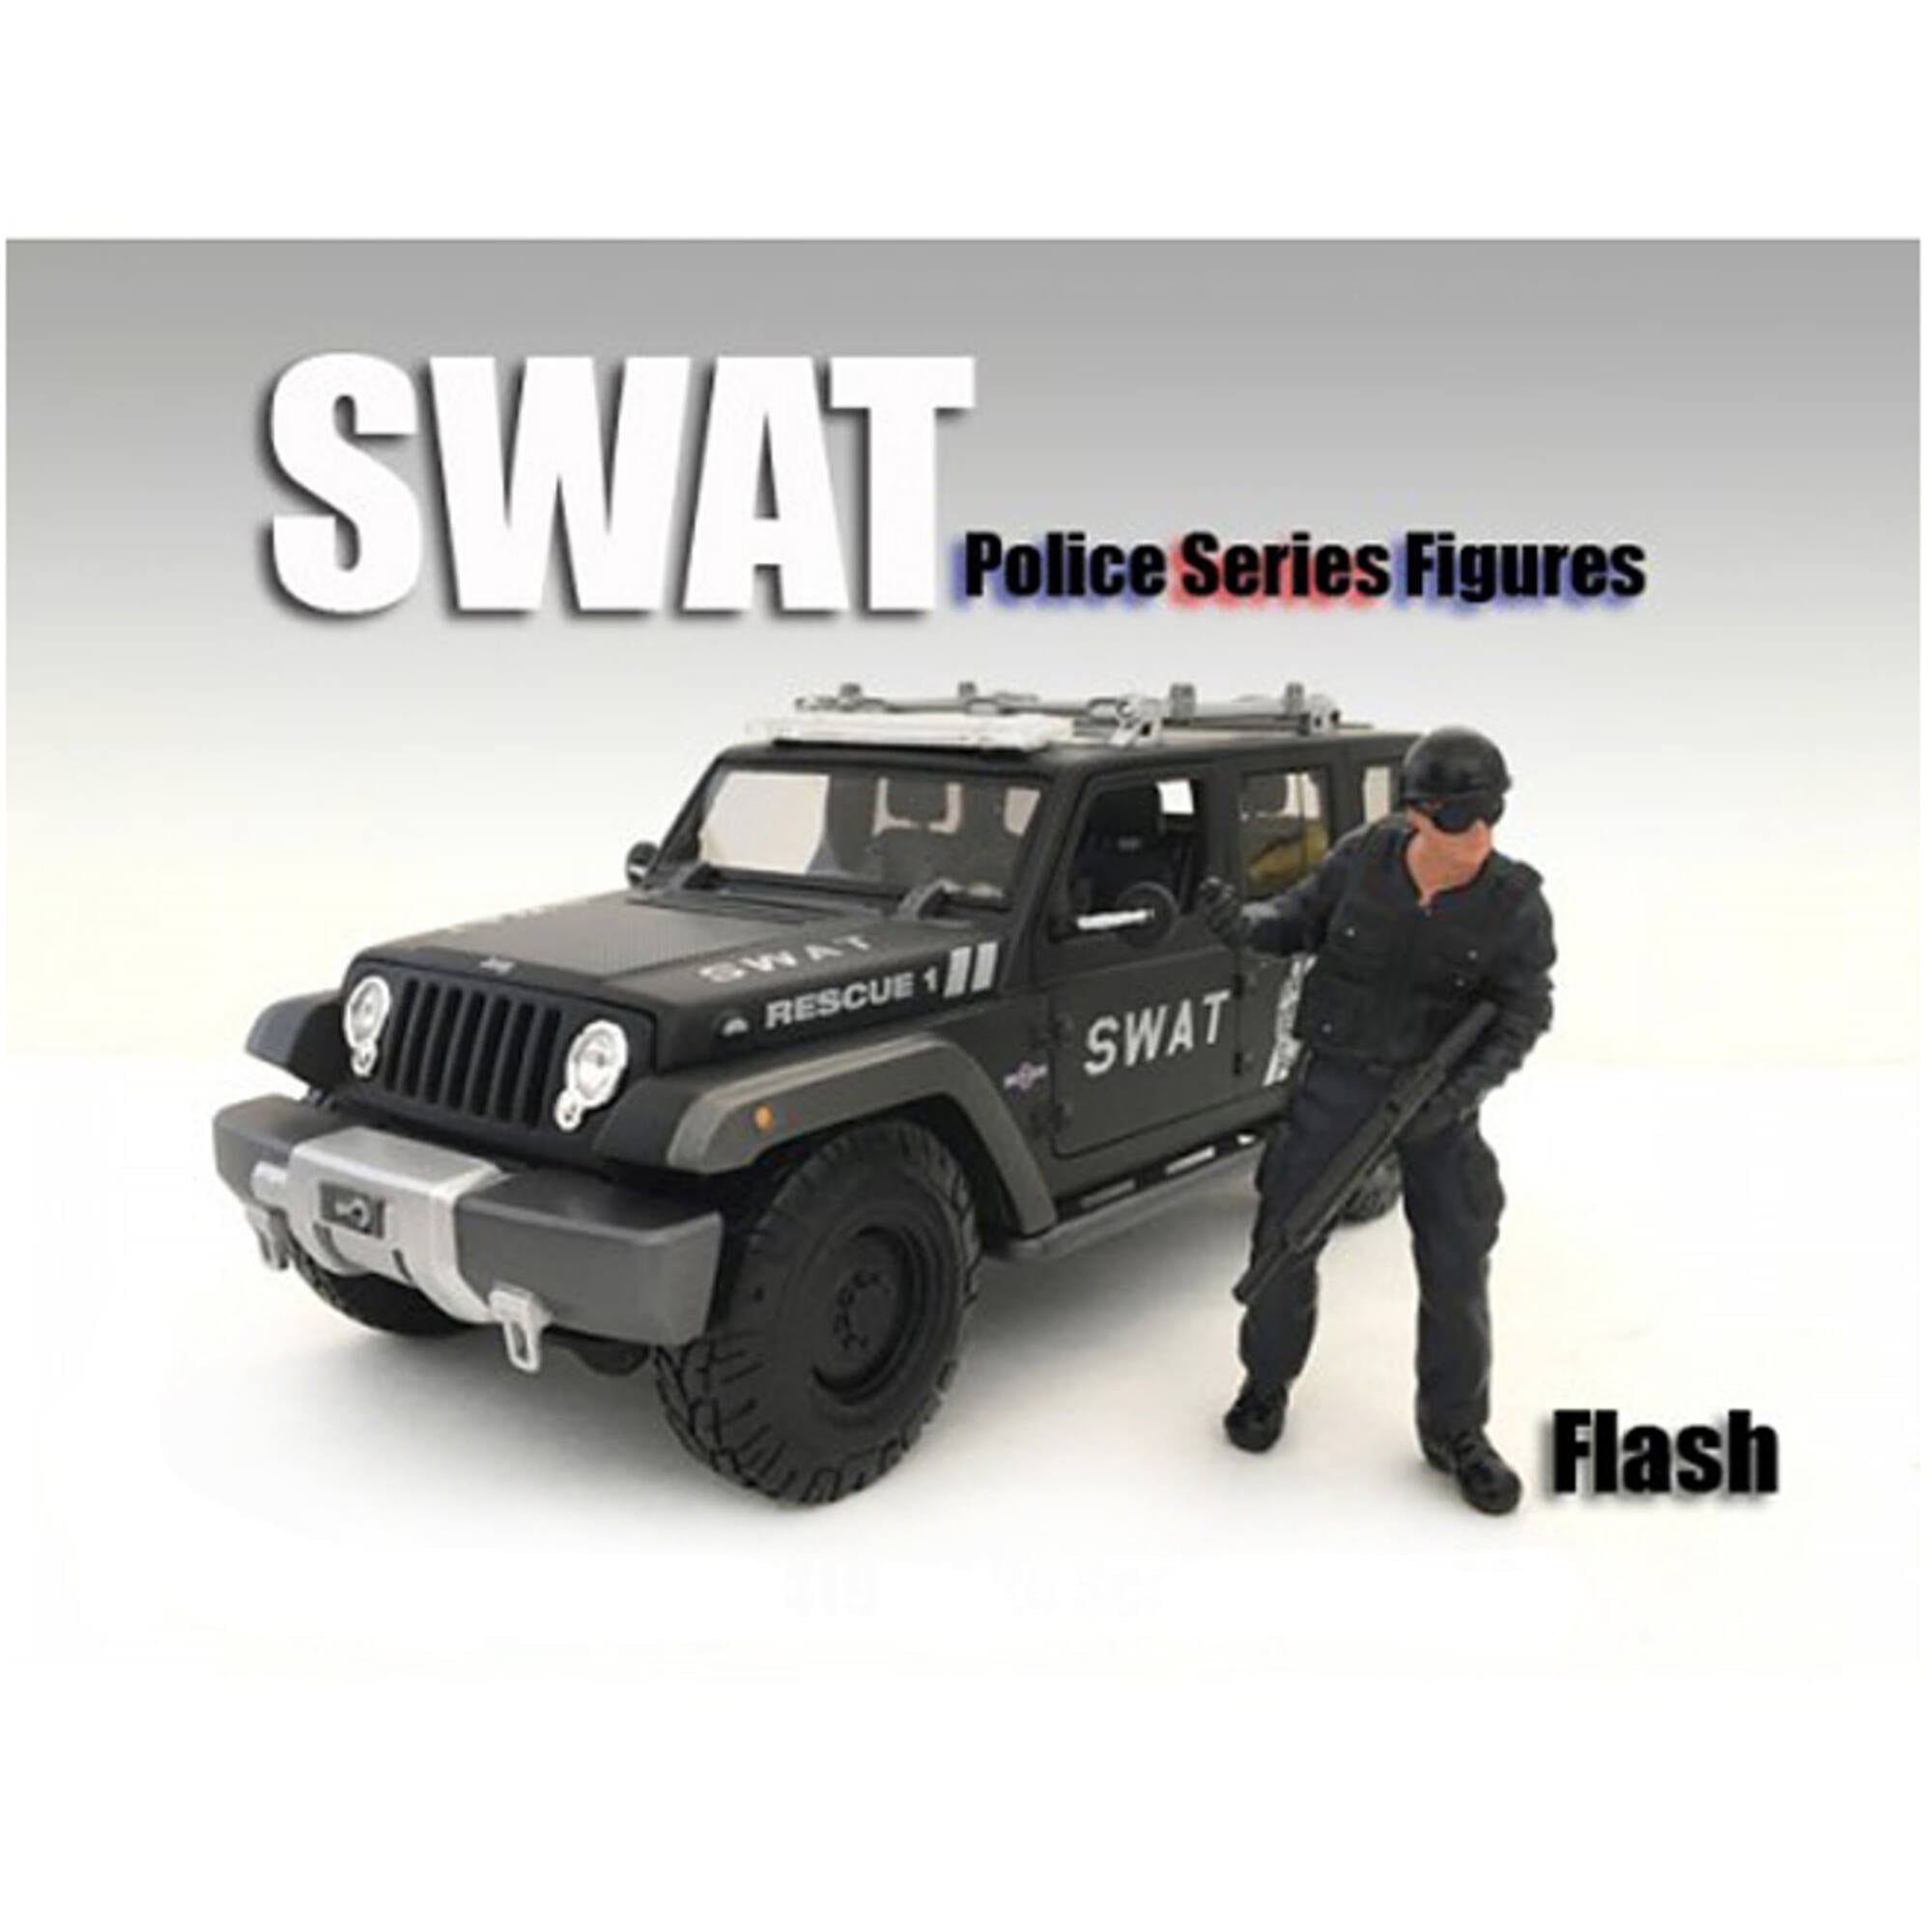 77419 1 By 18 Scale Swat Team Flash Figure For Models